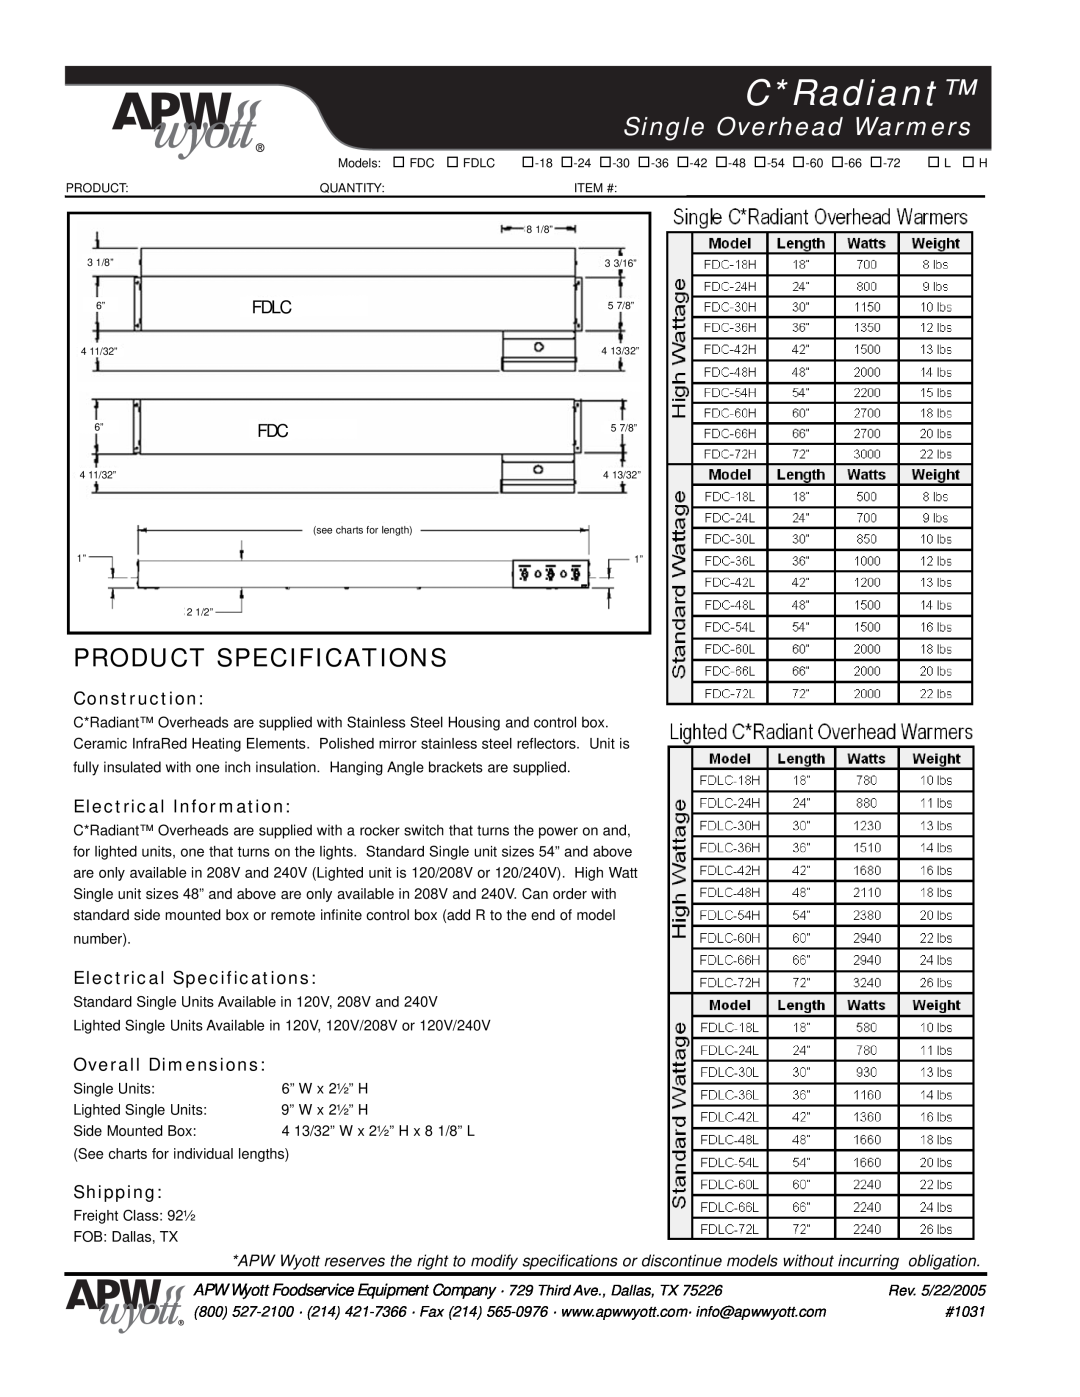 APW Wyott FDLC, FDC Product Specifications, C*Radiant, Single Overhead Warmers, Fdlc, Construction, Electrical Information 